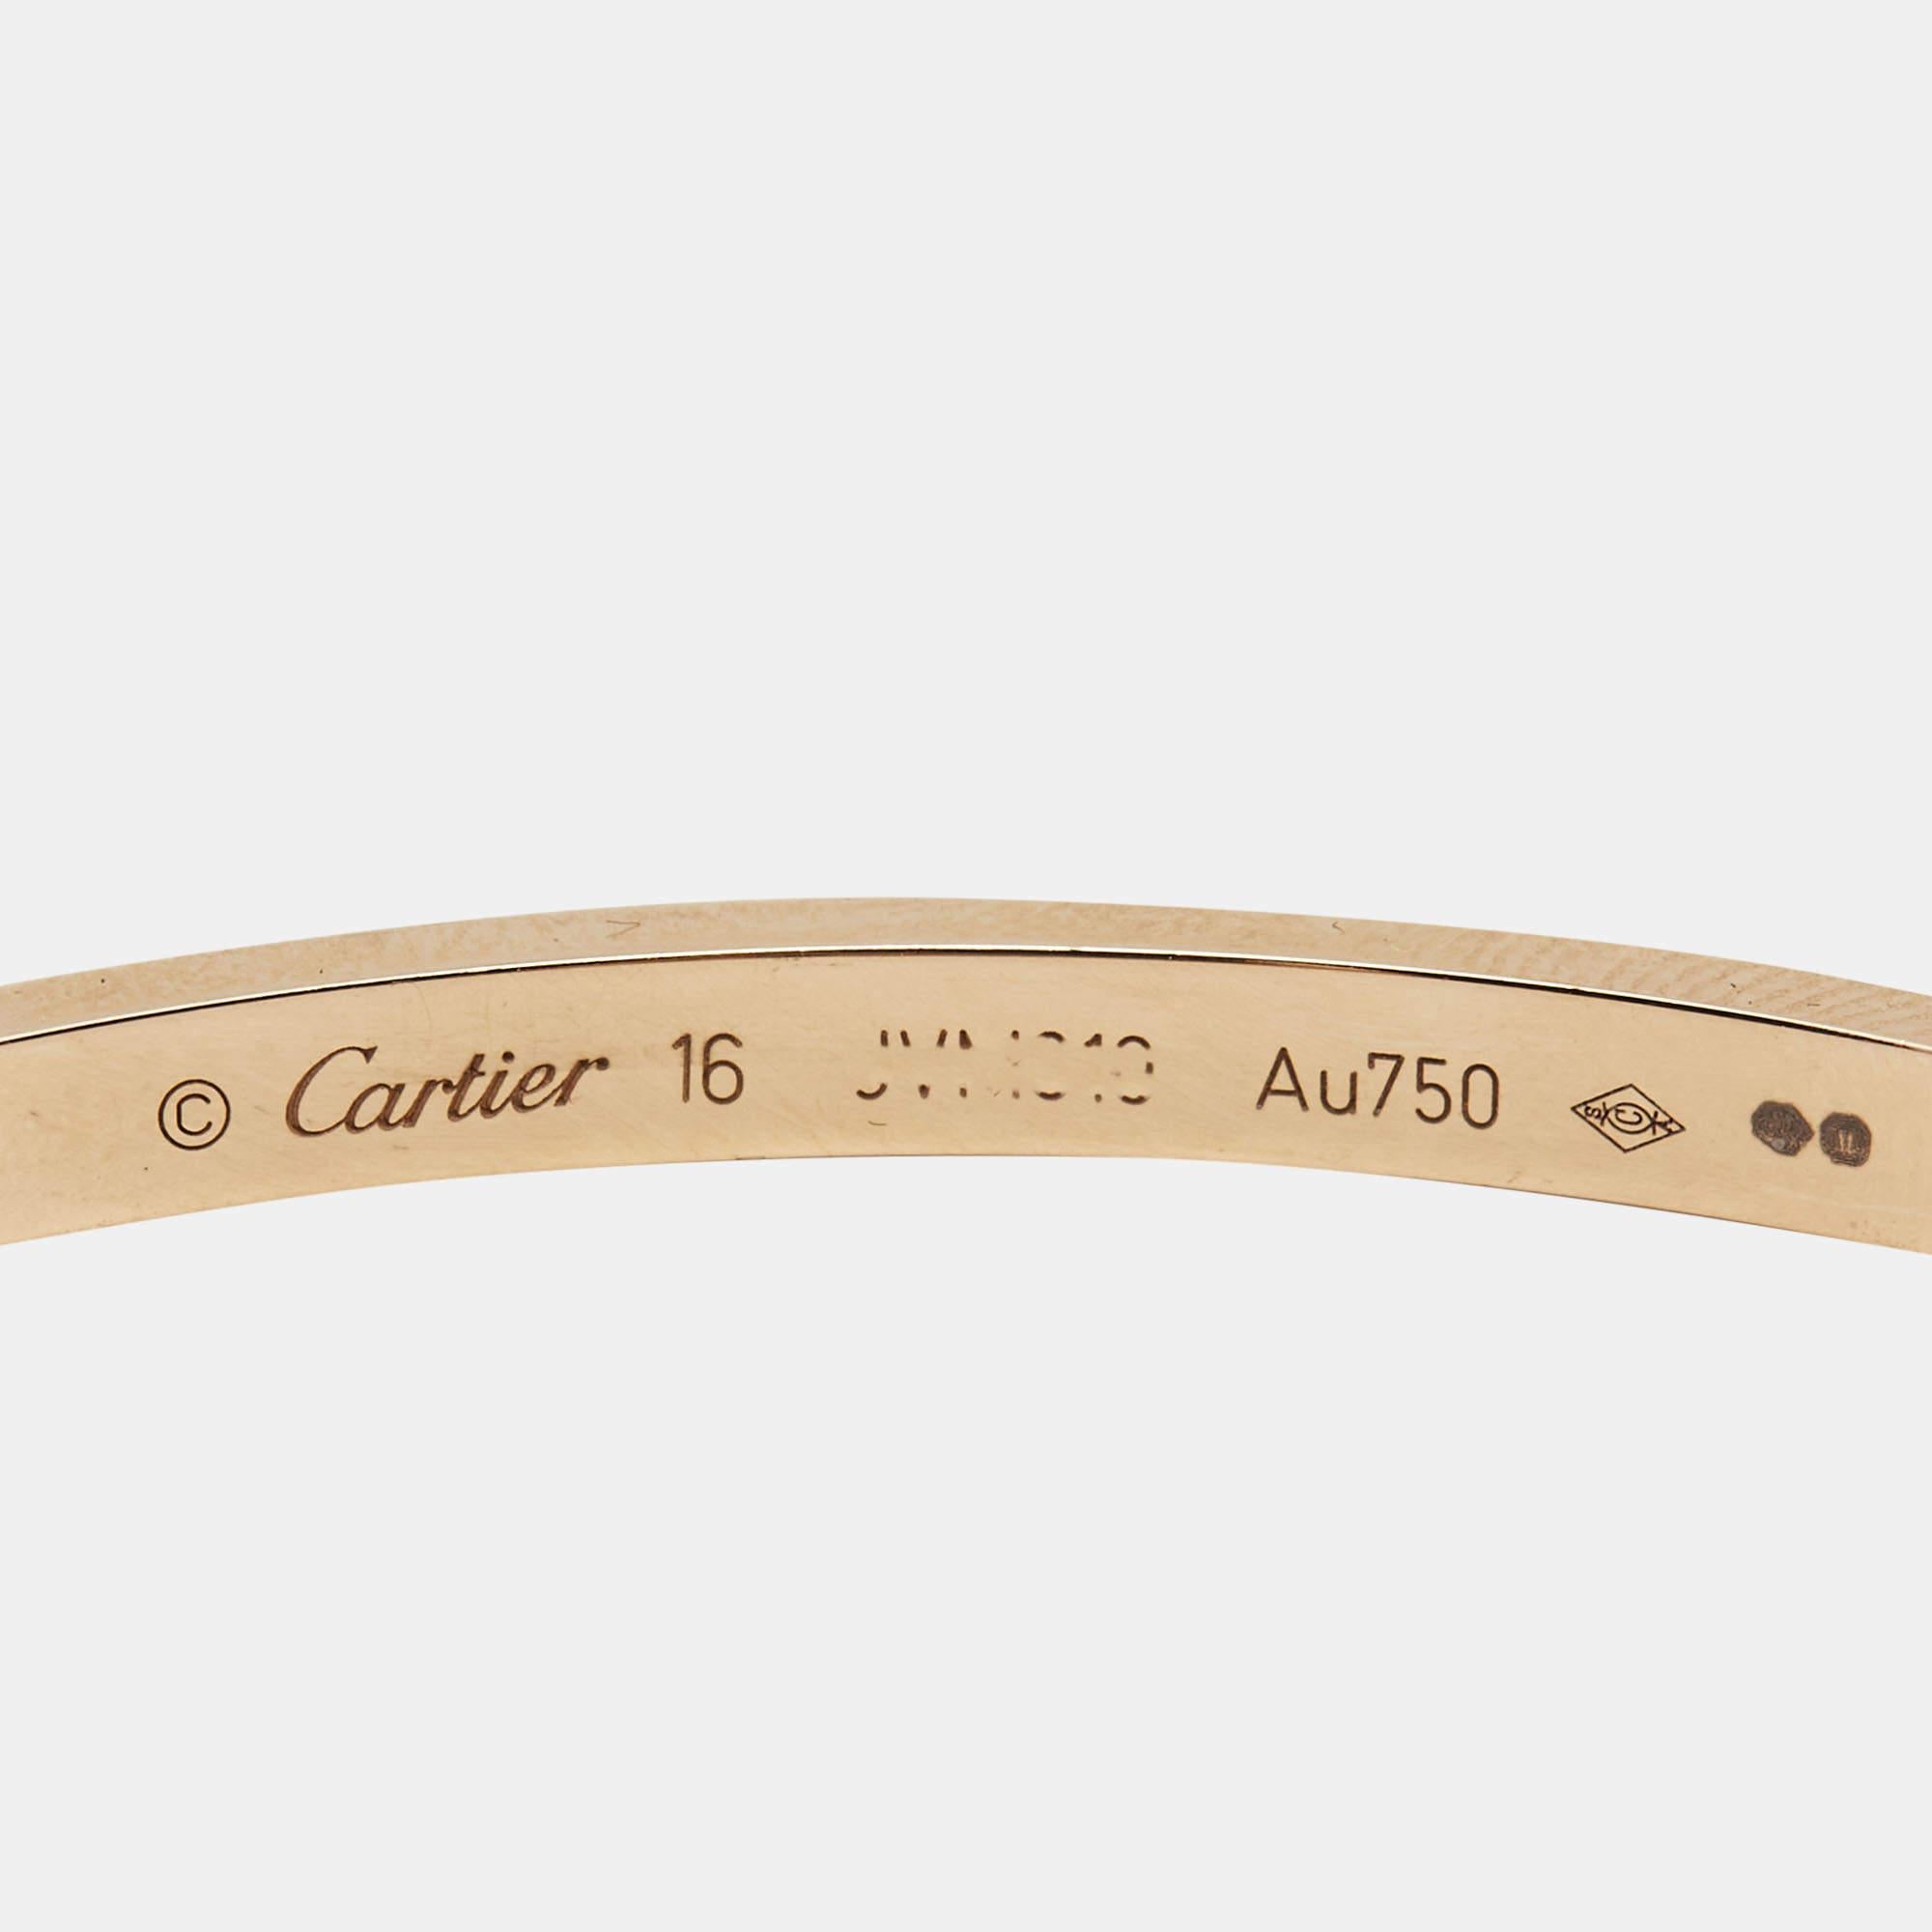 Precious stones are used to transform this Cartier Love bracelet into an exceptional jewel you can wear on special days. Sculpted using 18k rose gold and covered in incredible diamonds, the bracelet is a treat to the eyes. It is also added with the